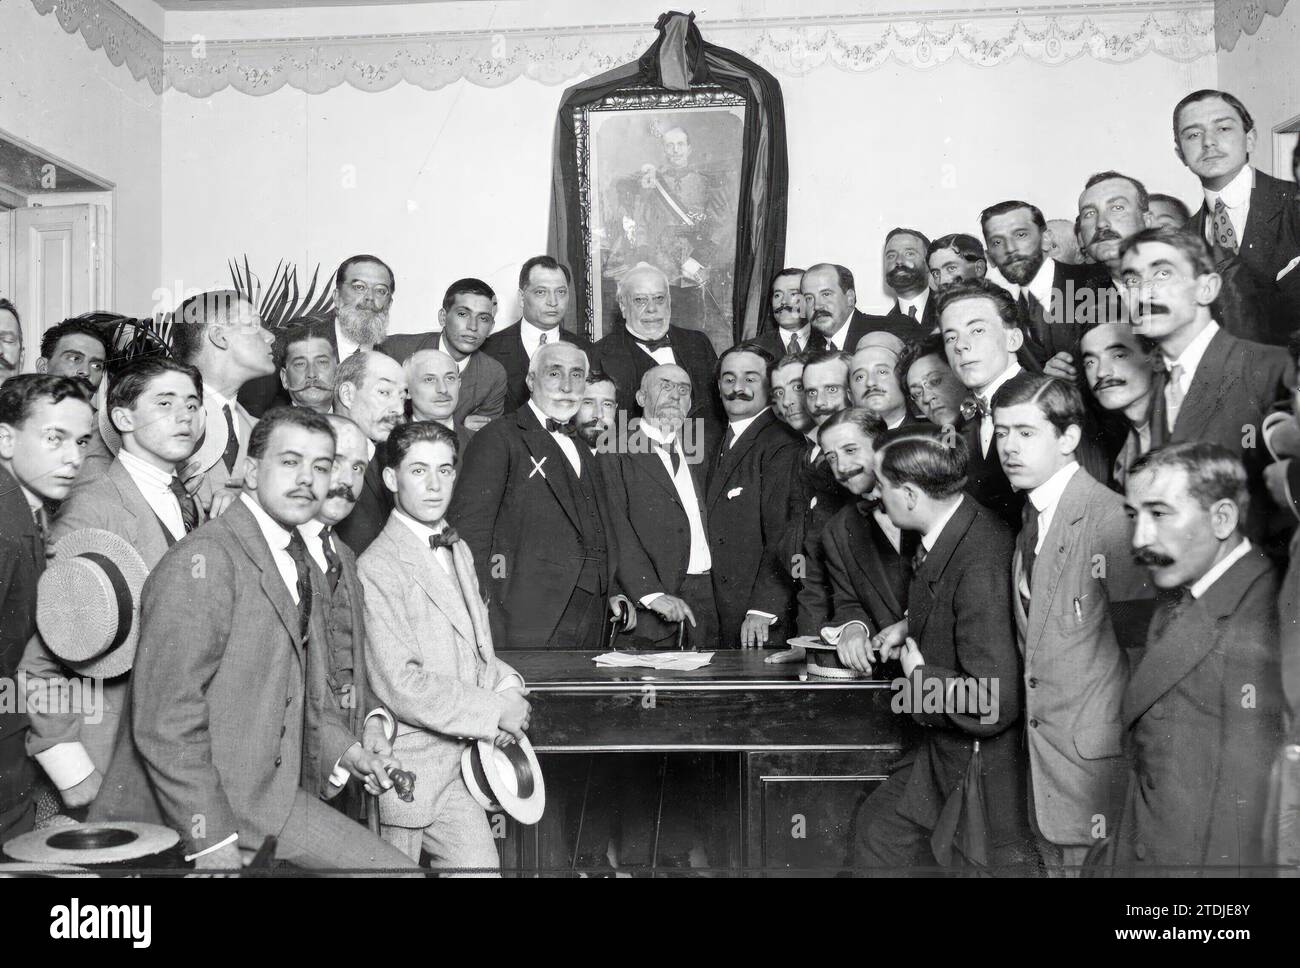 09/30/1915. New Maurist center in Madrid. The illustrious former president of the council Mr. Maura (X) at the inaugural session of the party's workers' instructional center in the congressional district. Credit: Album / Archivo ABC / Julio Duque Stock Photo